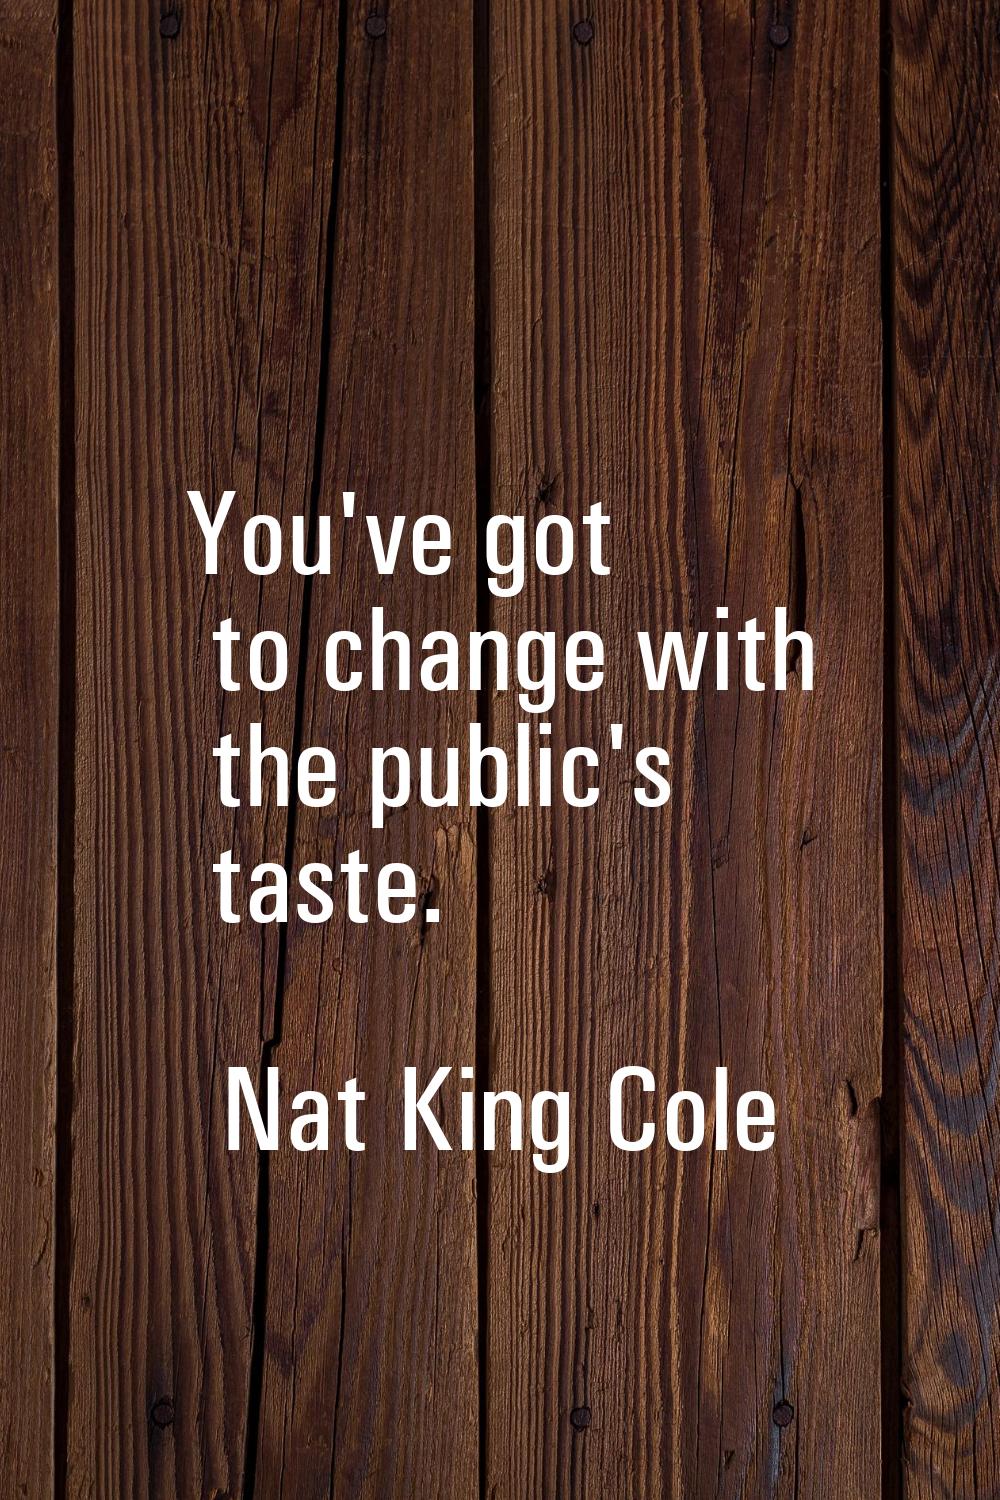 You've got to change with the public's taste.